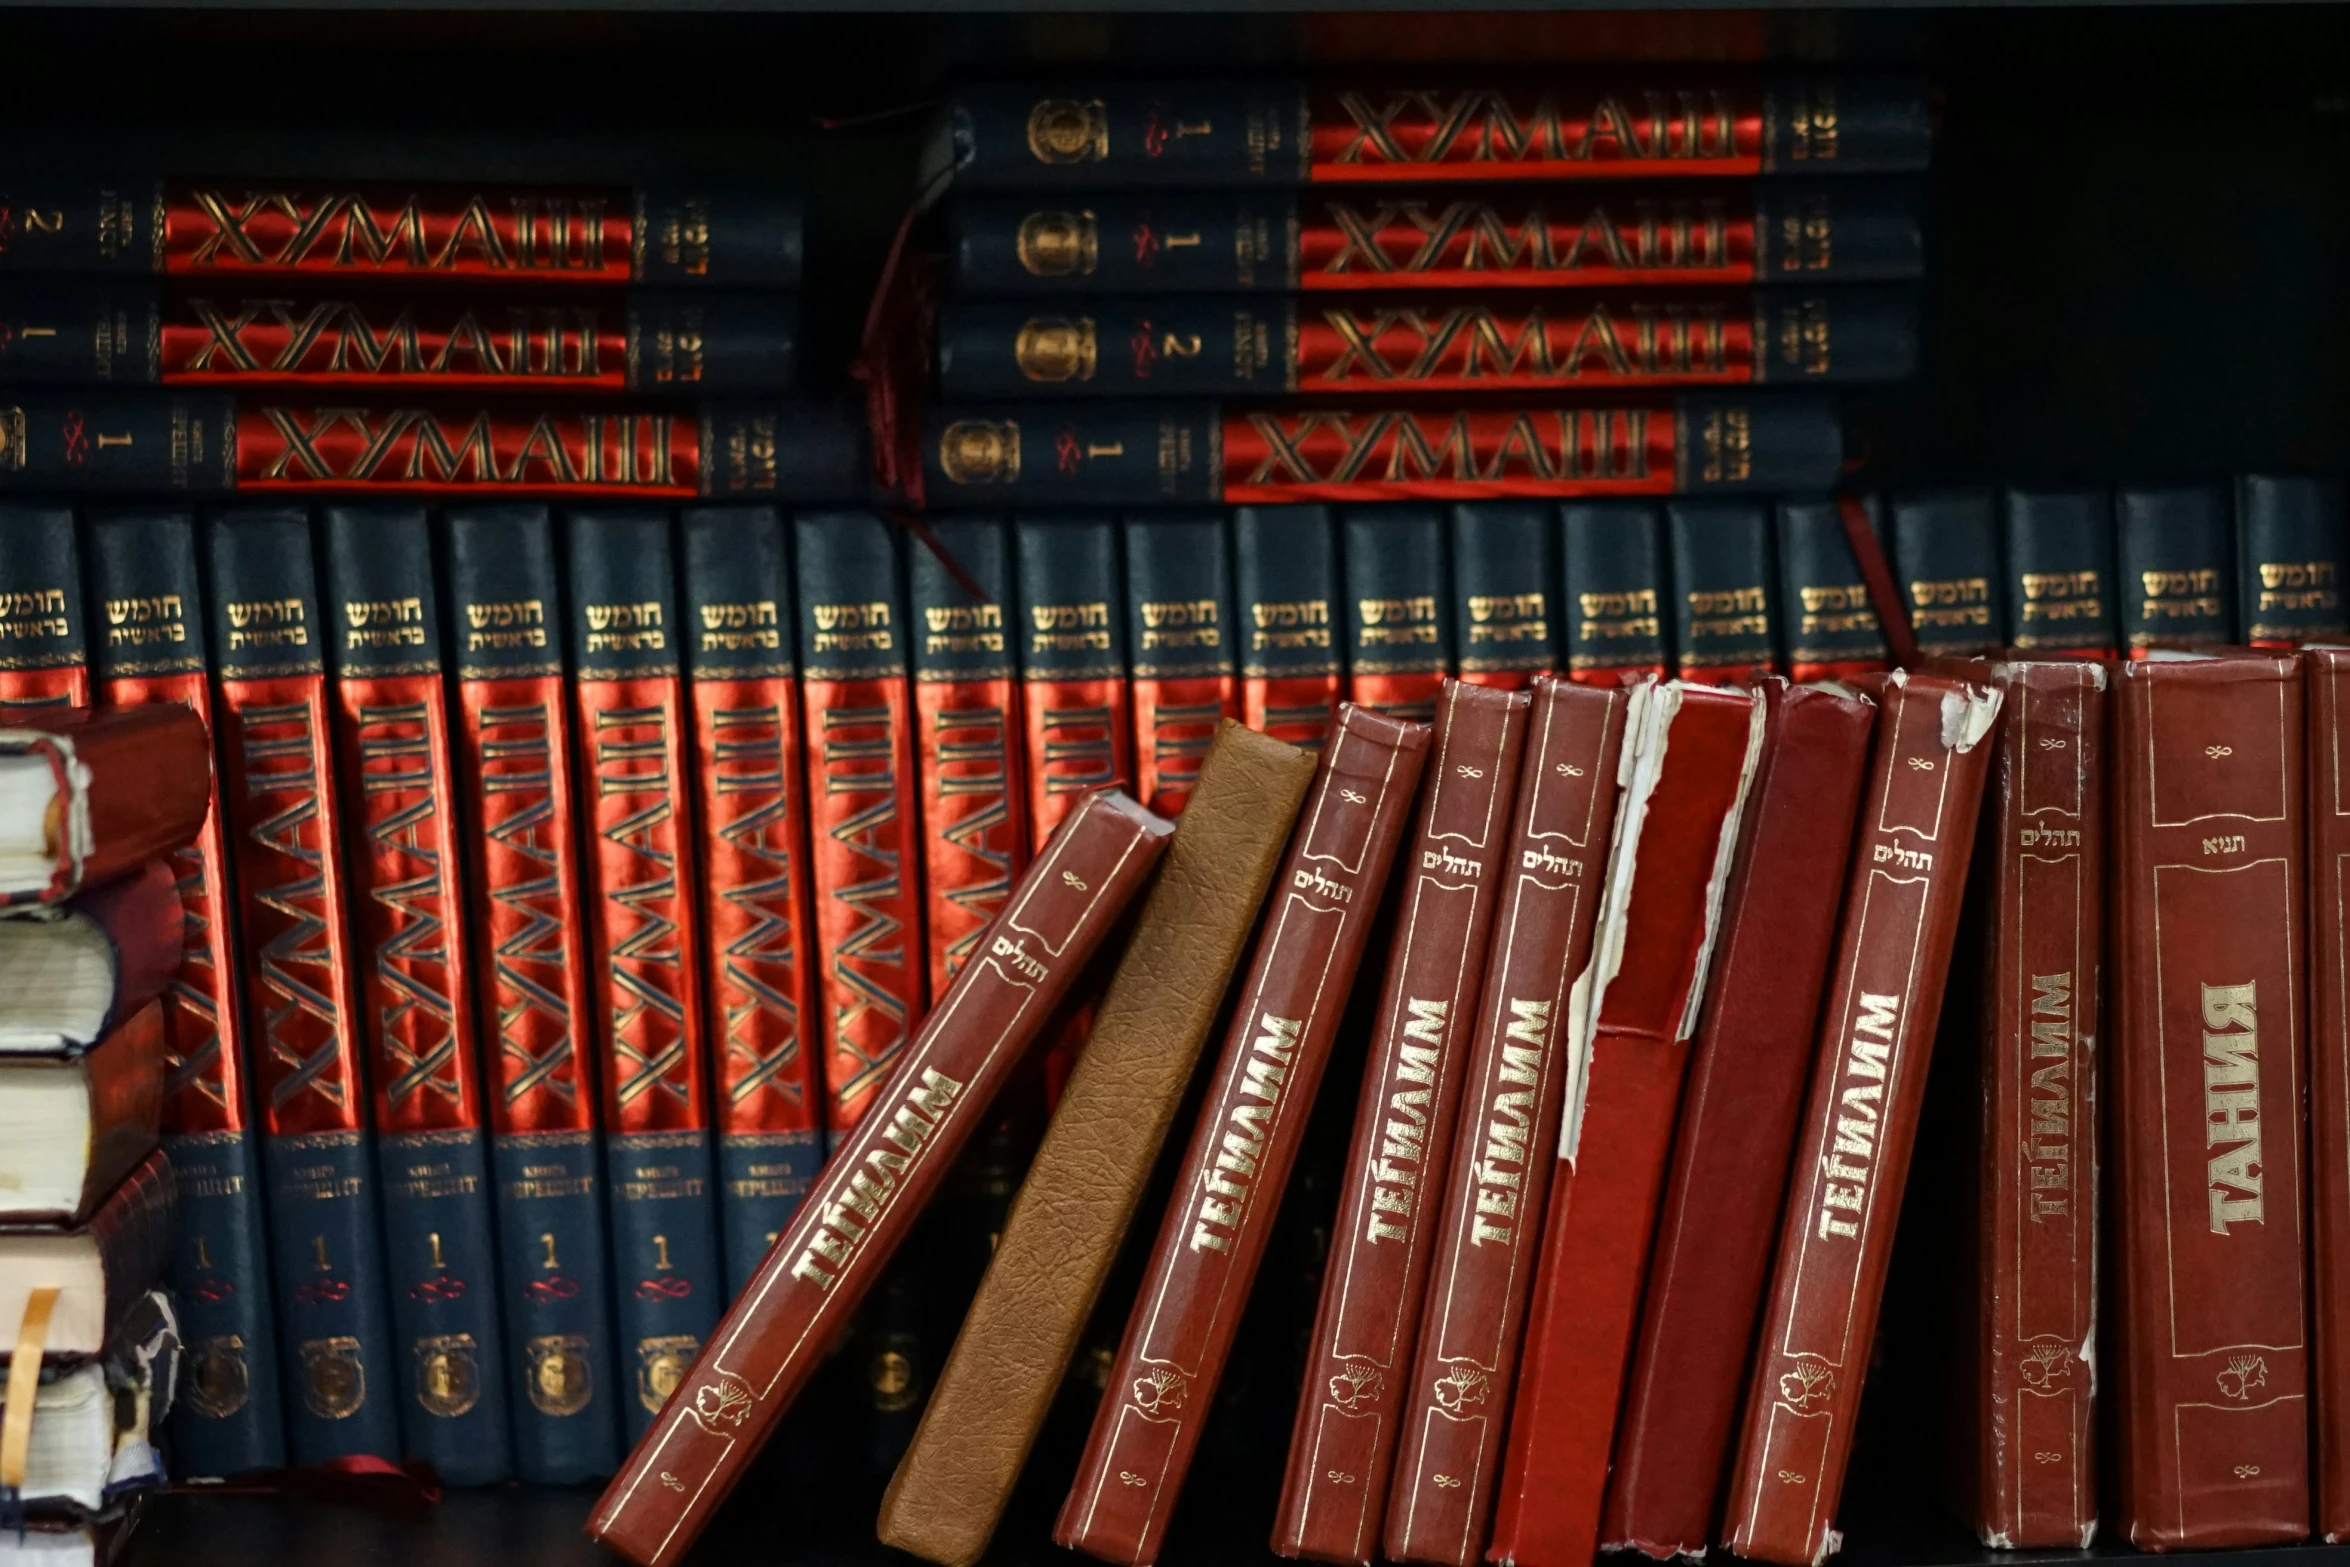 rows of red and blue books in a shelf